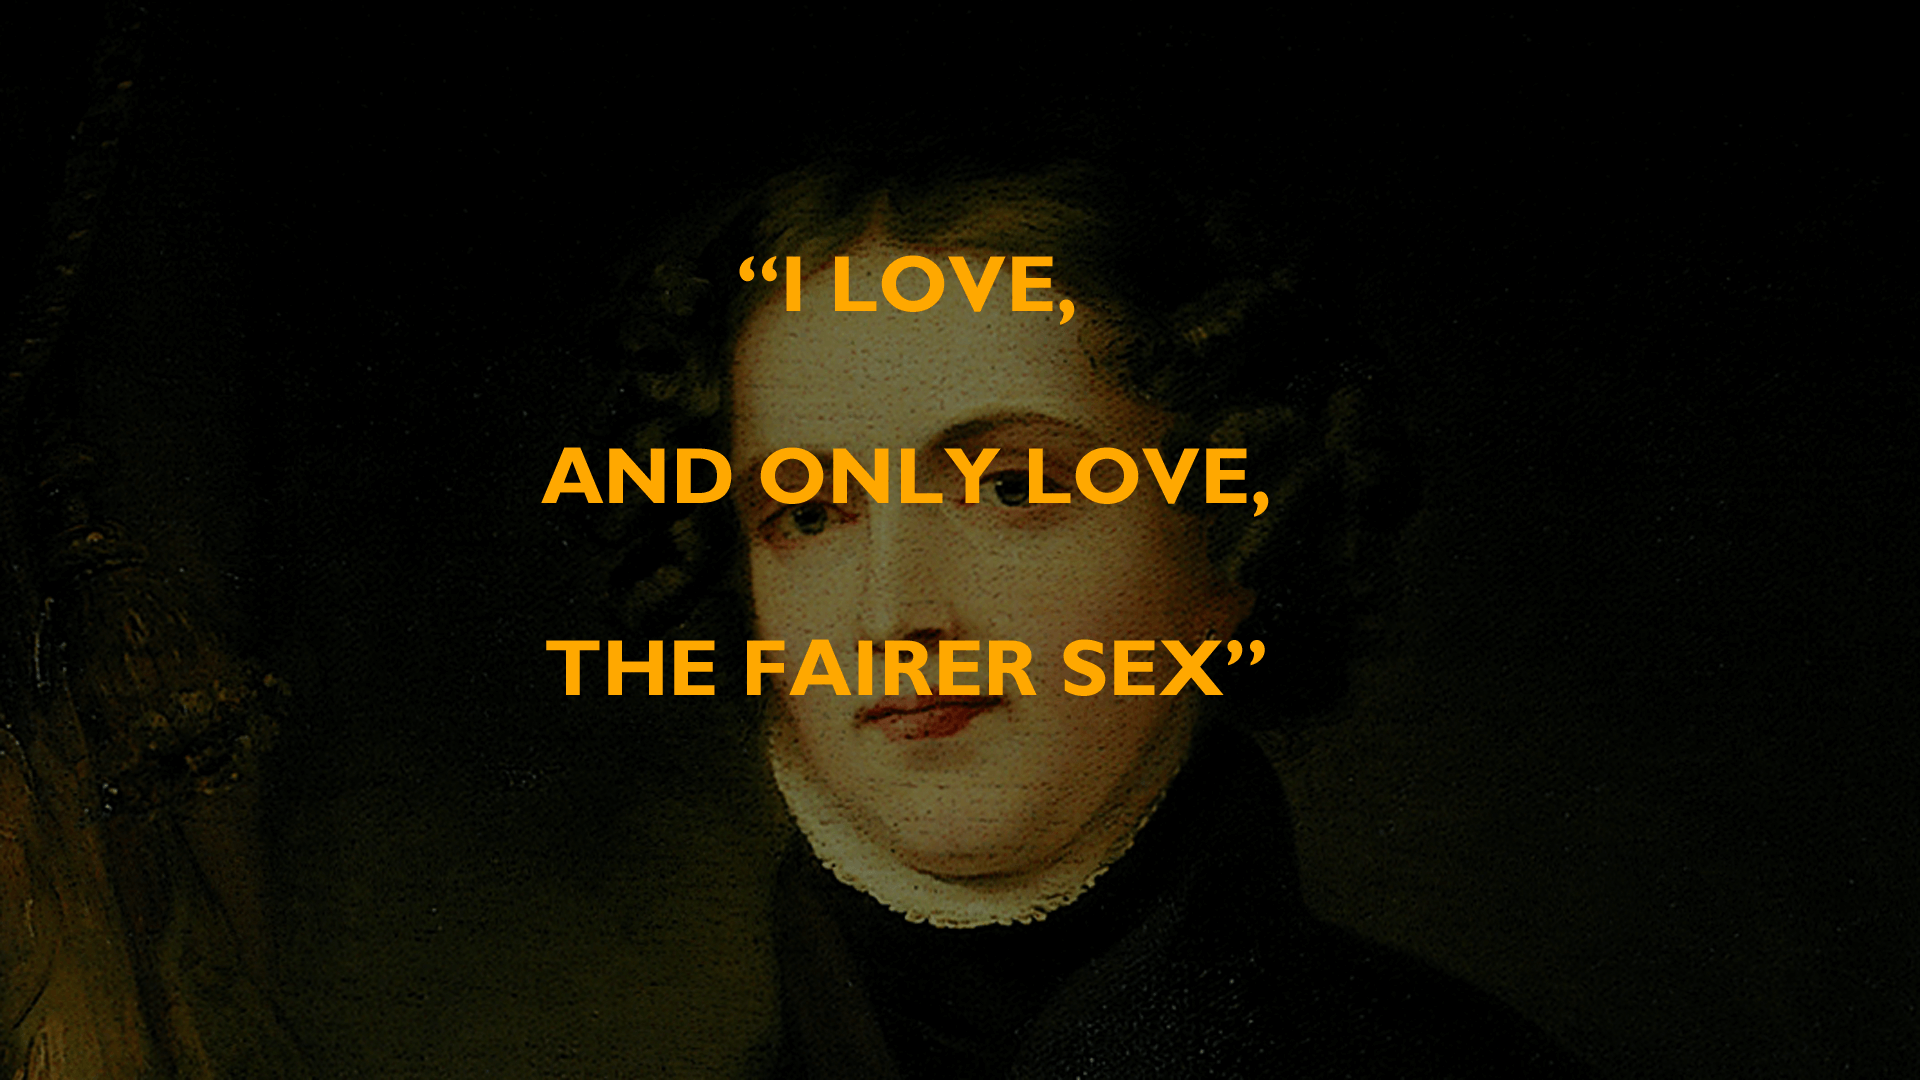 No Priest But Love by Anne Lister